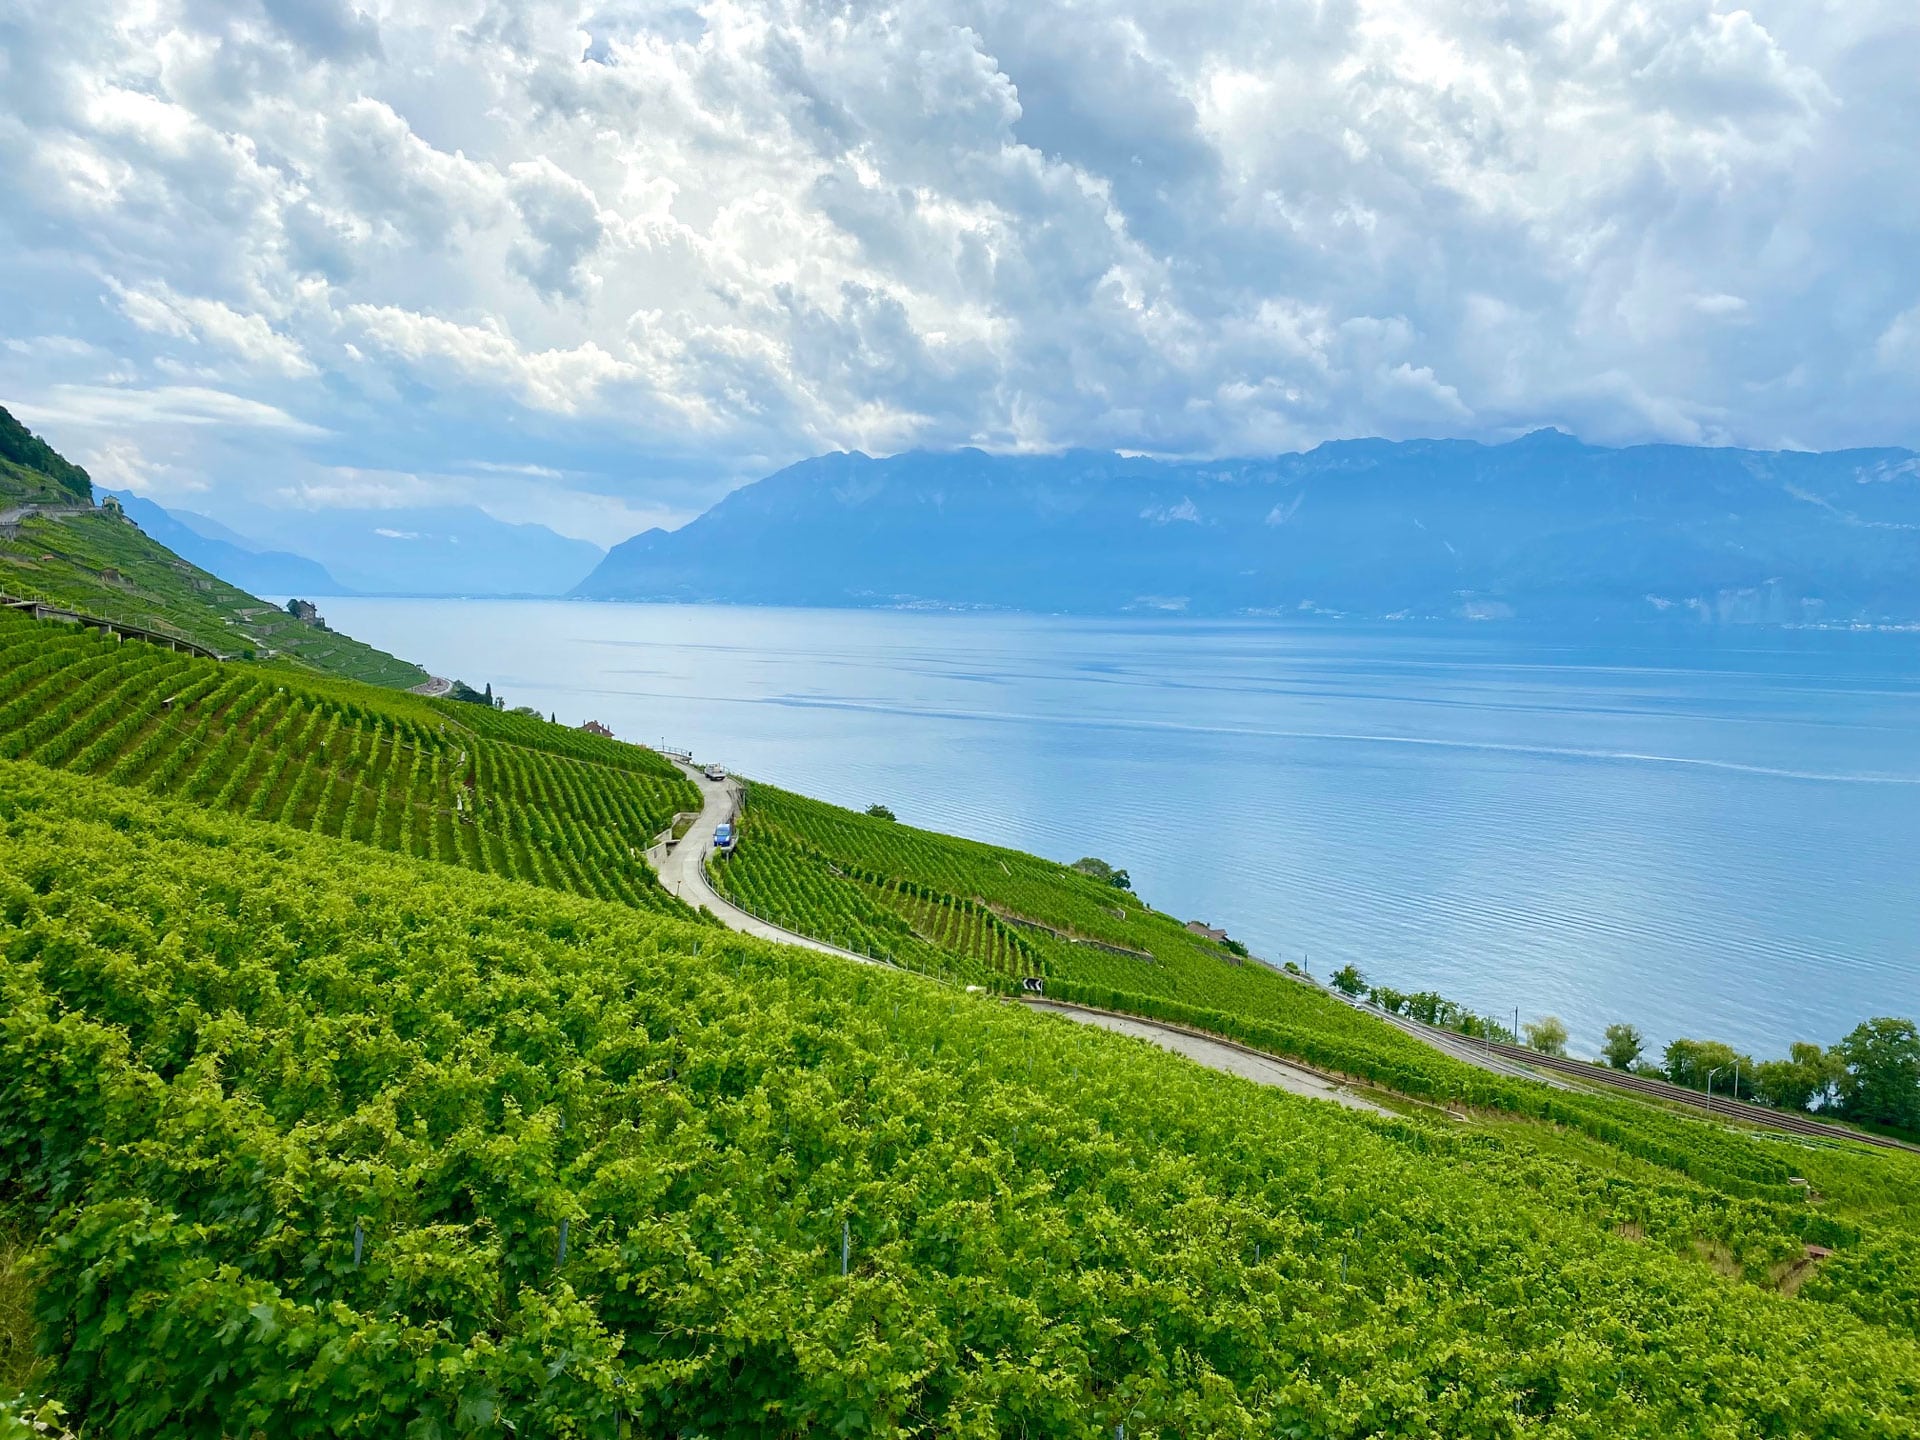 Western Switzerland 2 Days Private Tour – Between must-see places & hidden gems – Montreux, Vineyards & Grand Canyon of Switzerland (Lucerne)